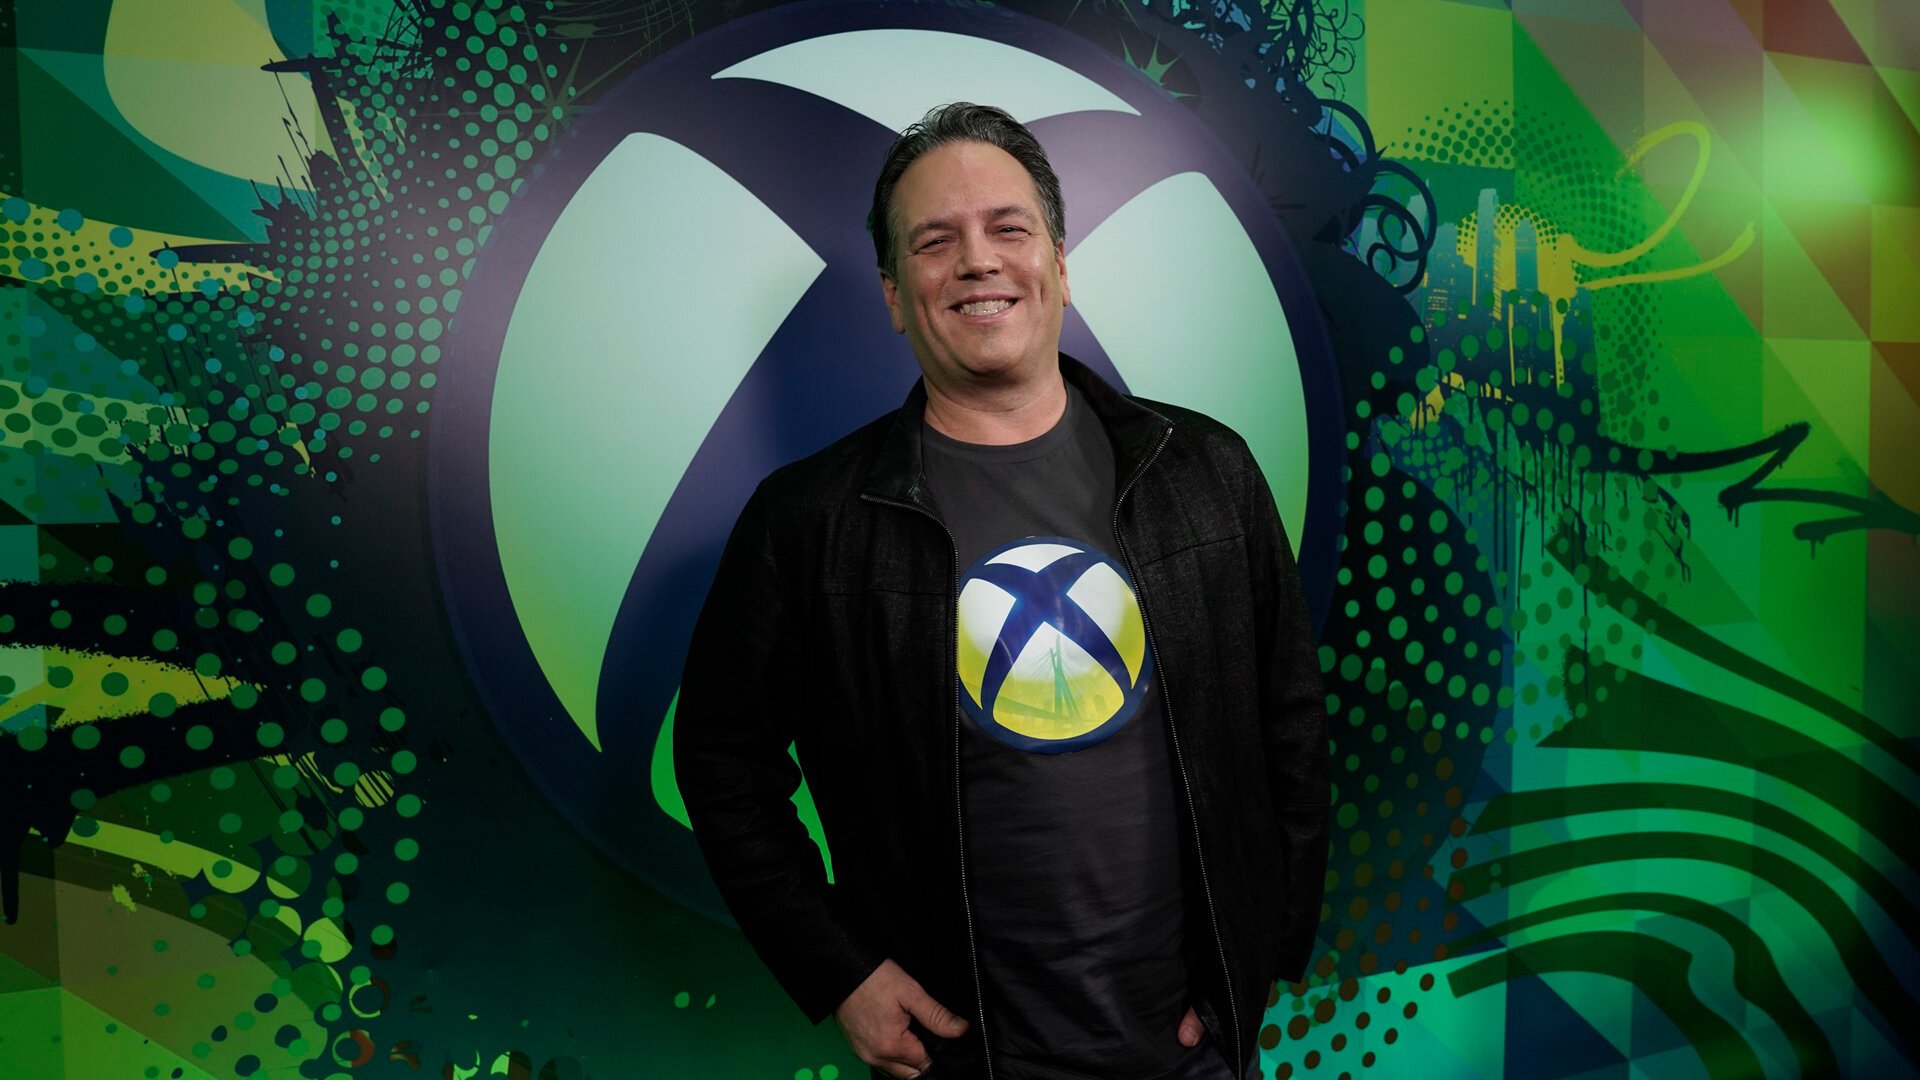 'Everyone Deserves to Play': Why Xbox Head Phil Spencer's 'Doom' Comments Struck a Nerve